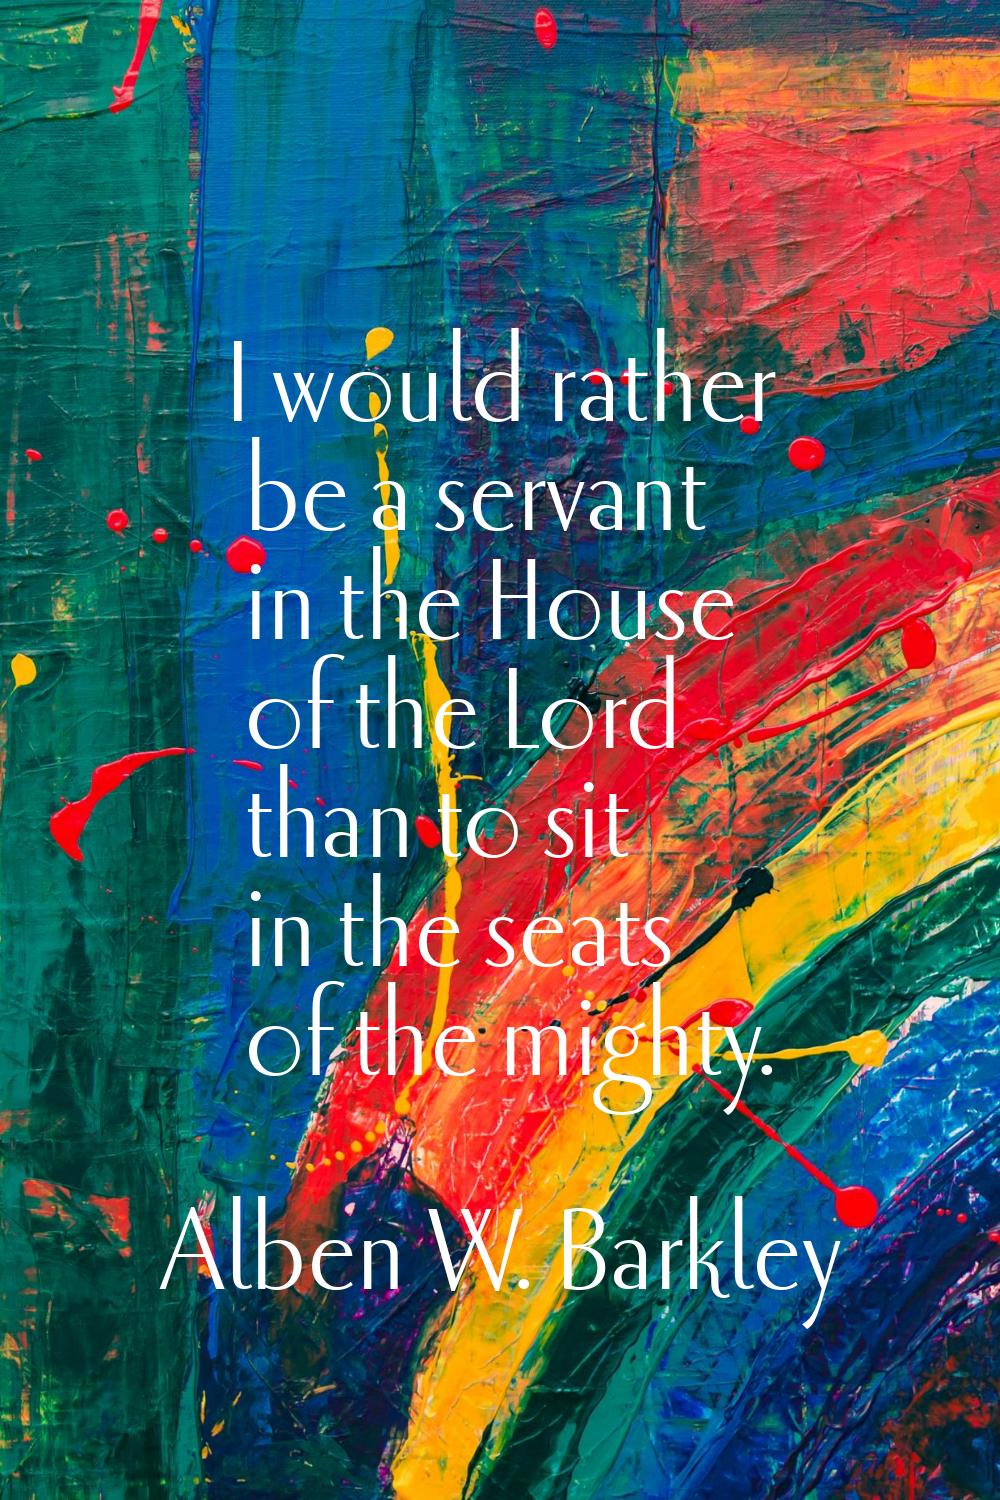 I would rather be a servant in the House of the Lord than to sit in the seats of the mighty.